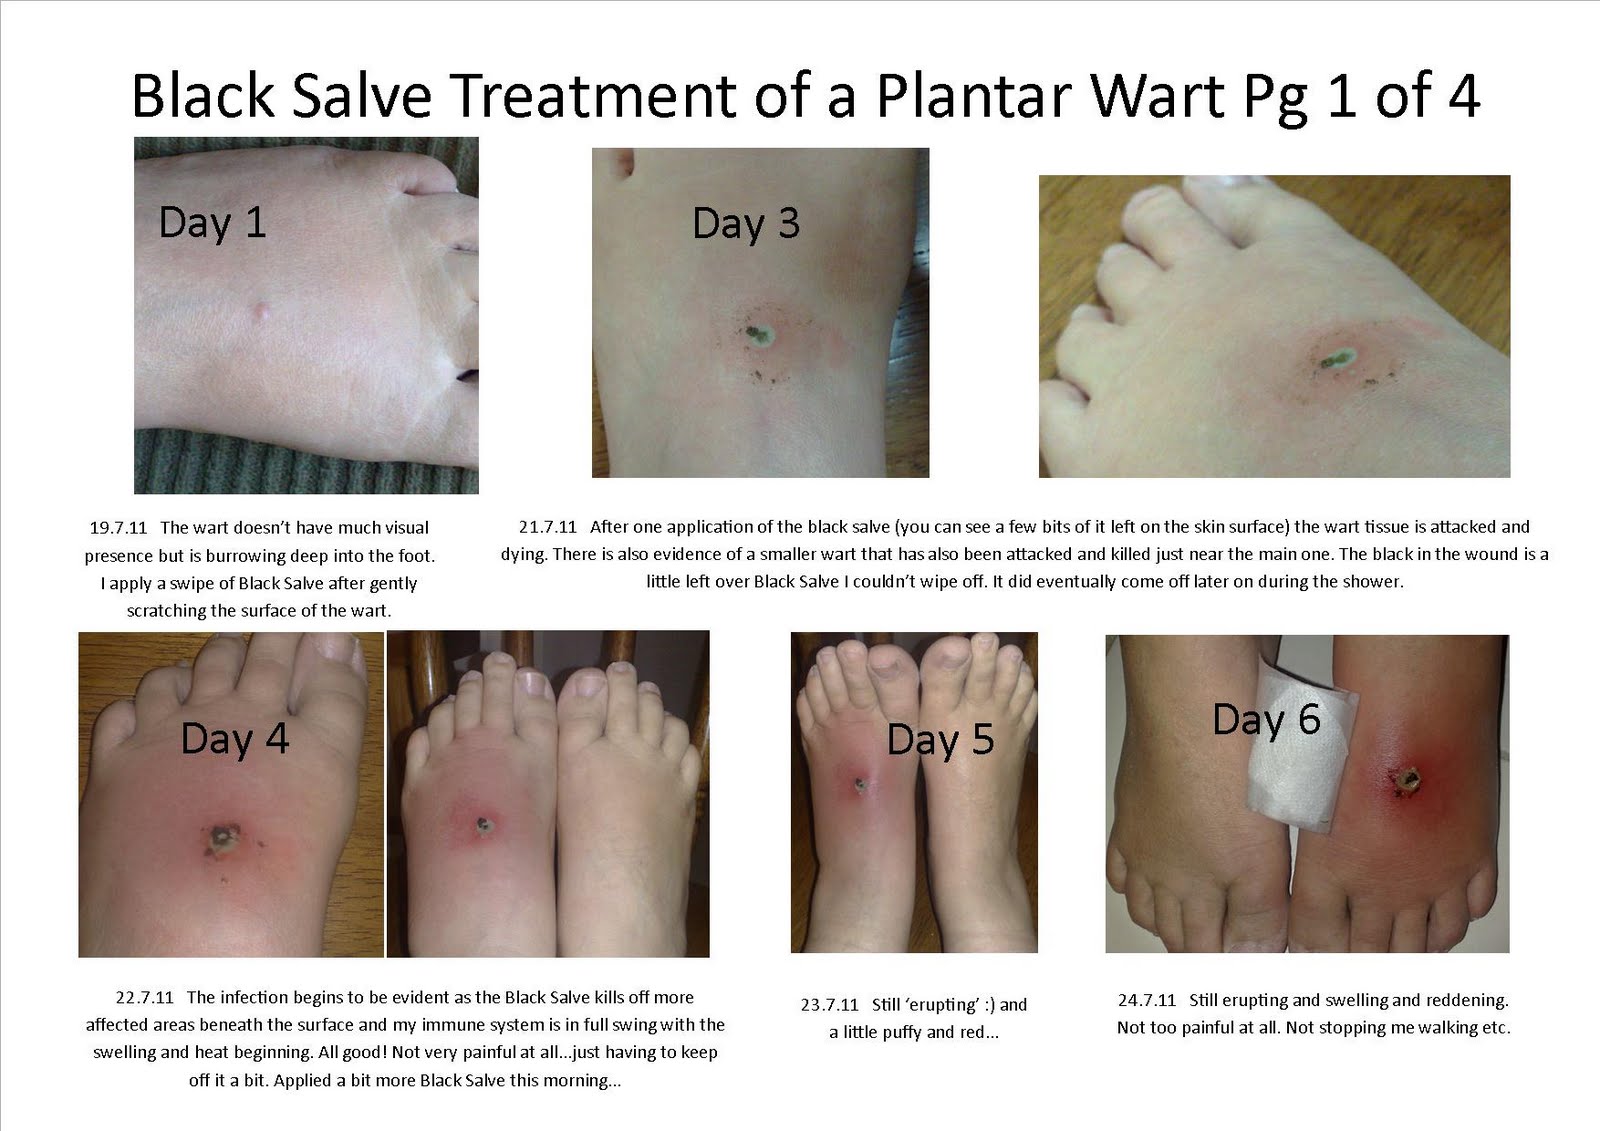 Holistic Therapy Connections Treatment of a Plantar Wart